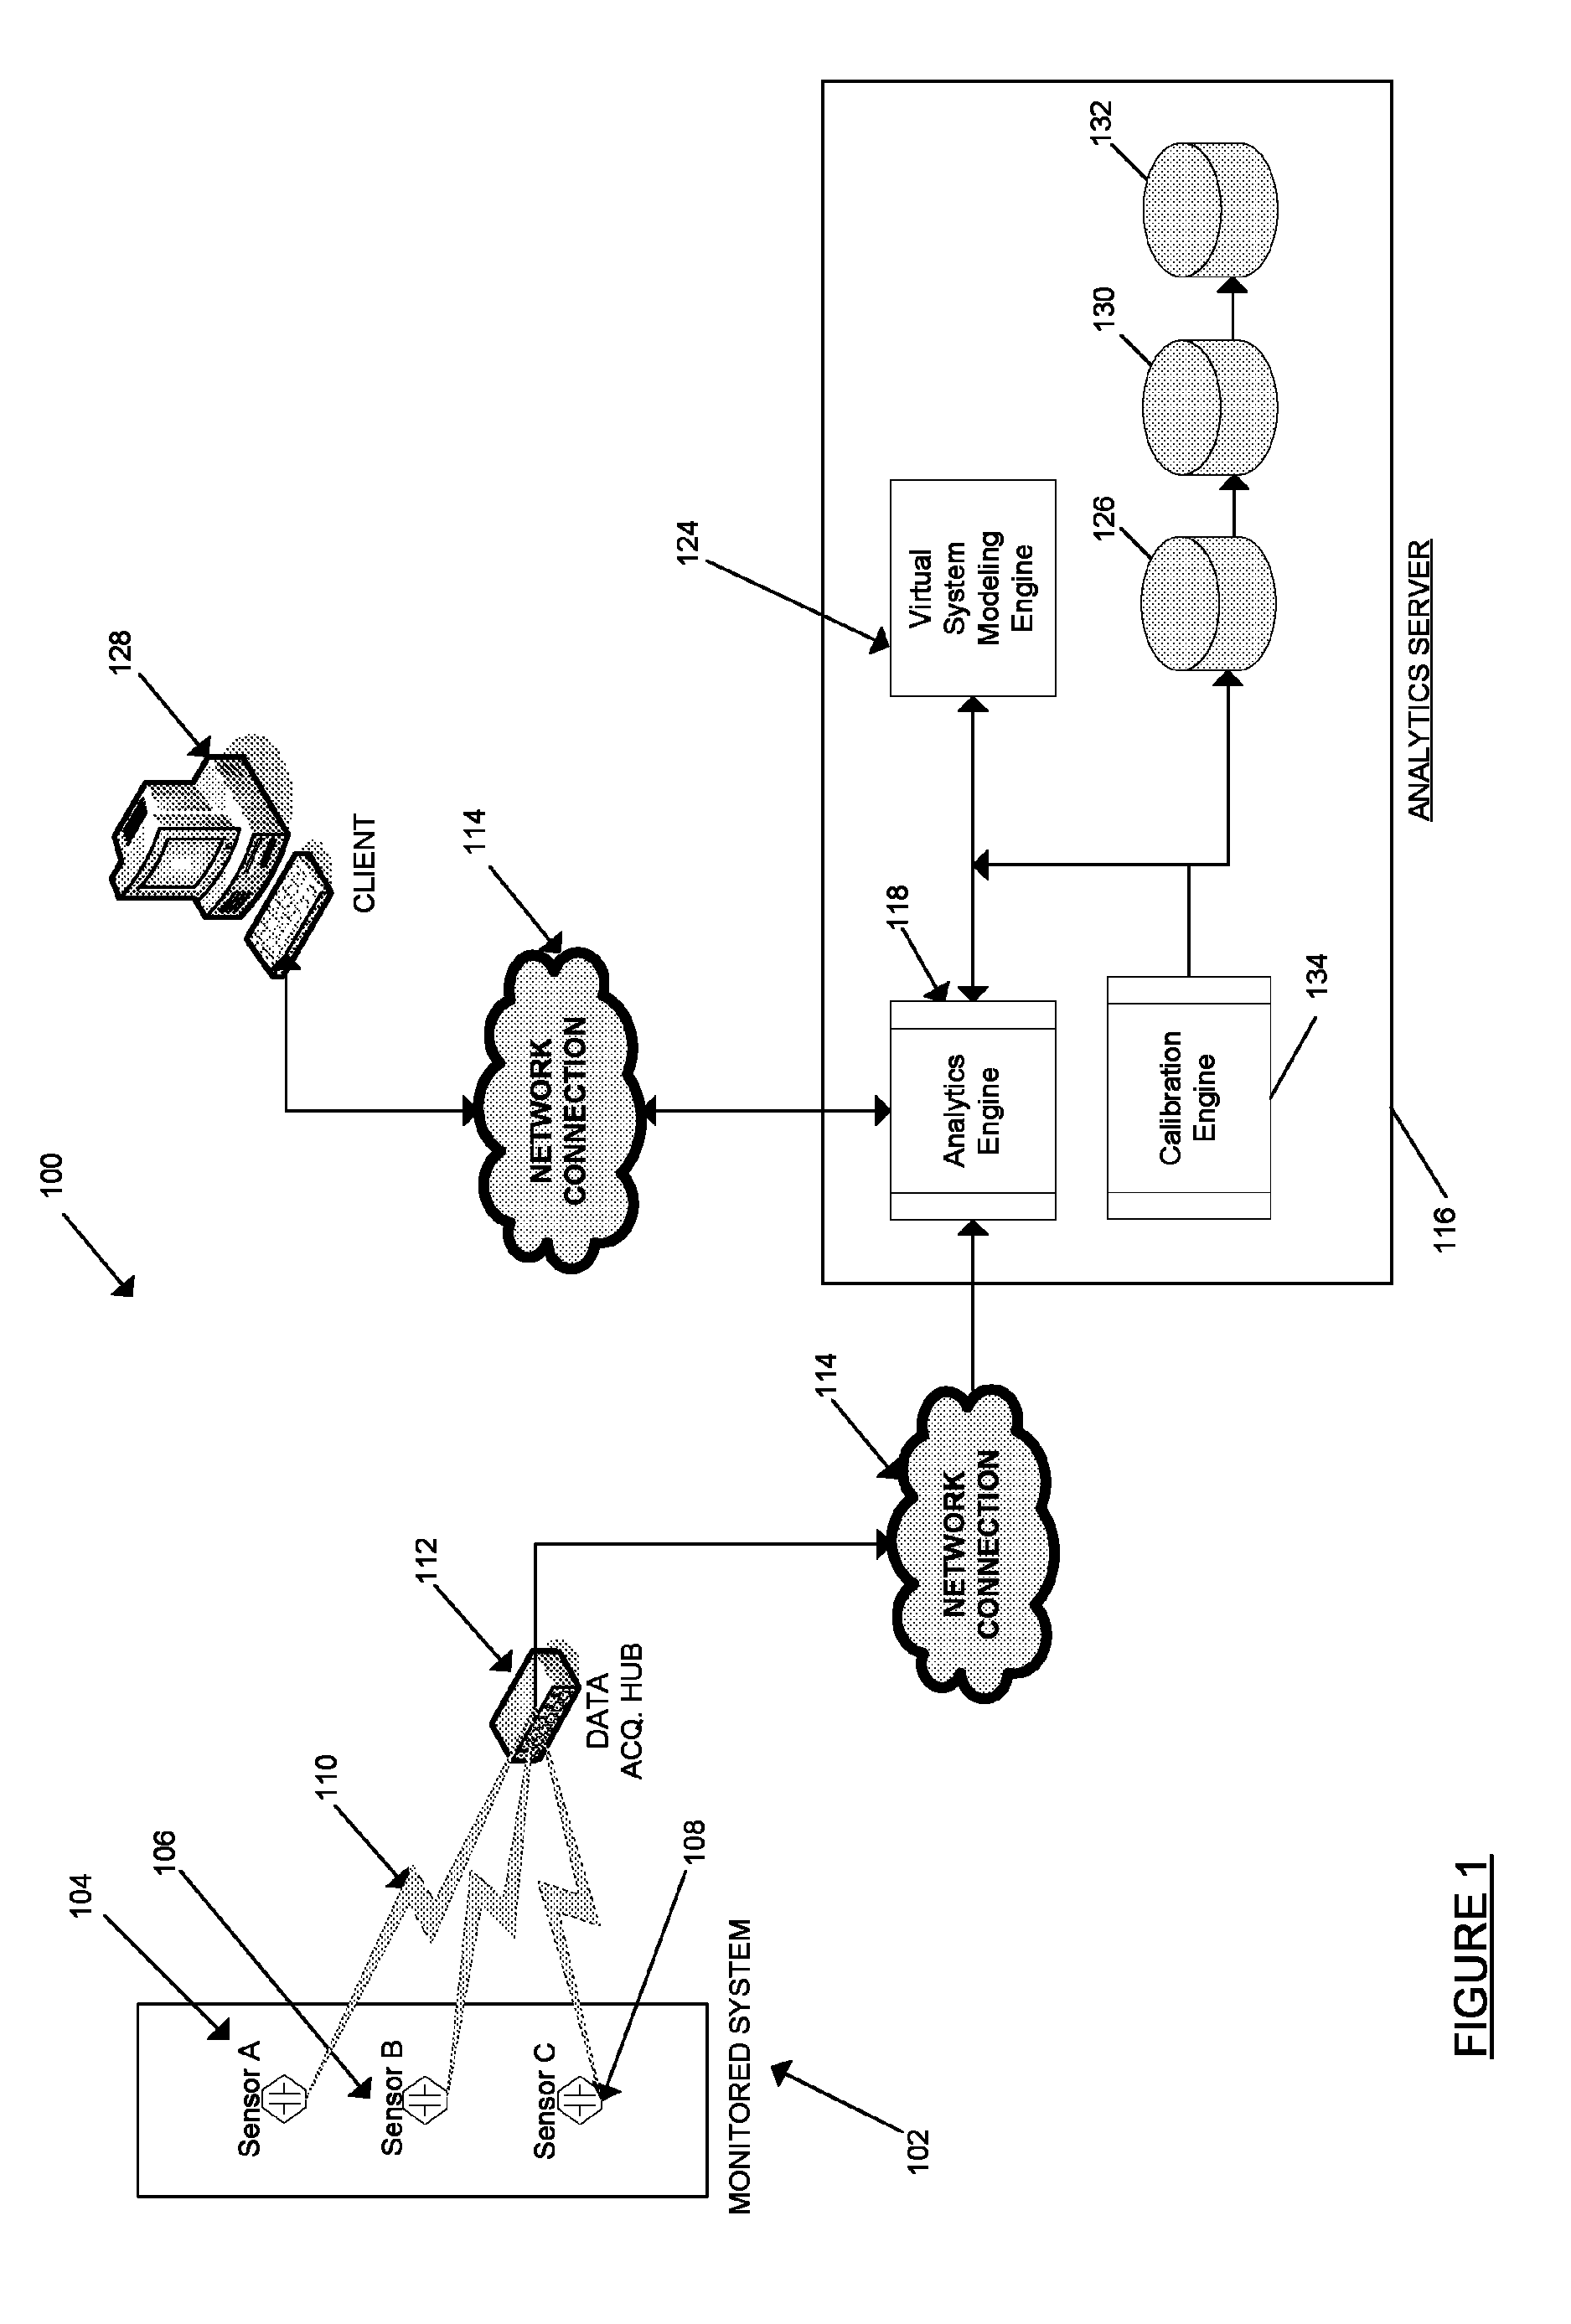 Systems and methods for real-time dynamic simulation of uninterruptible power supply solutions and their control logic systems